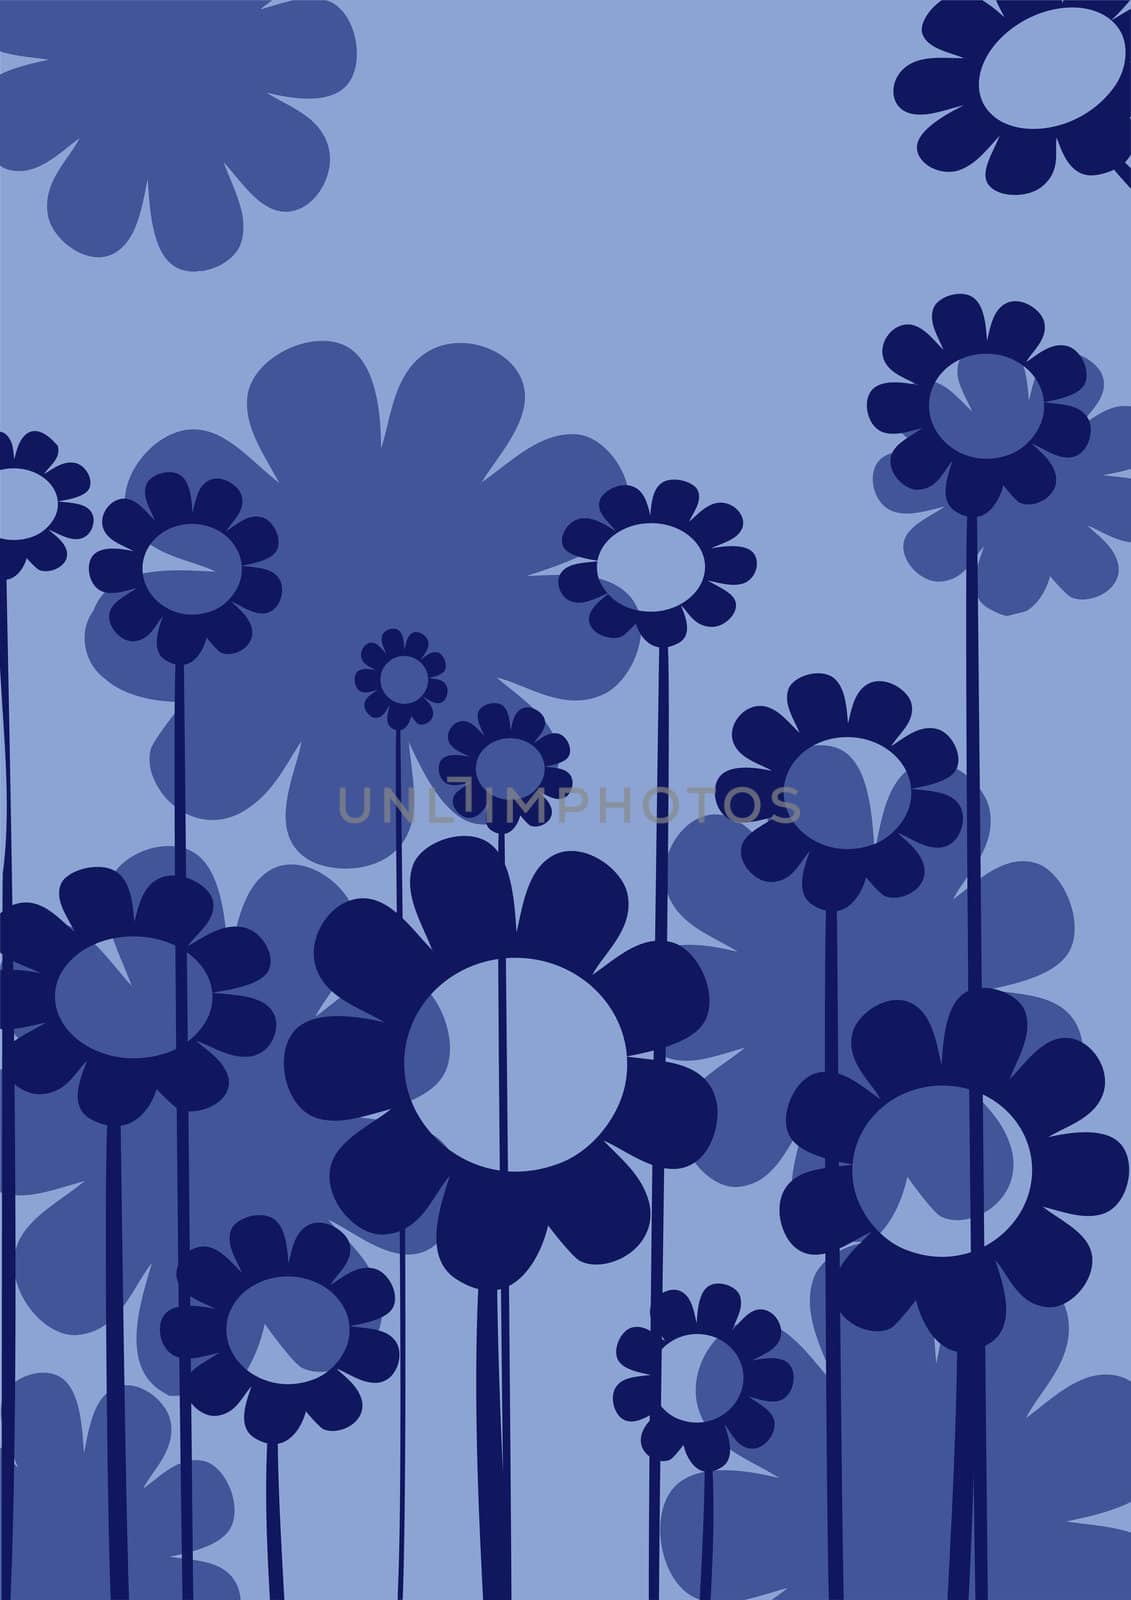 Blue floral composition by Lirch